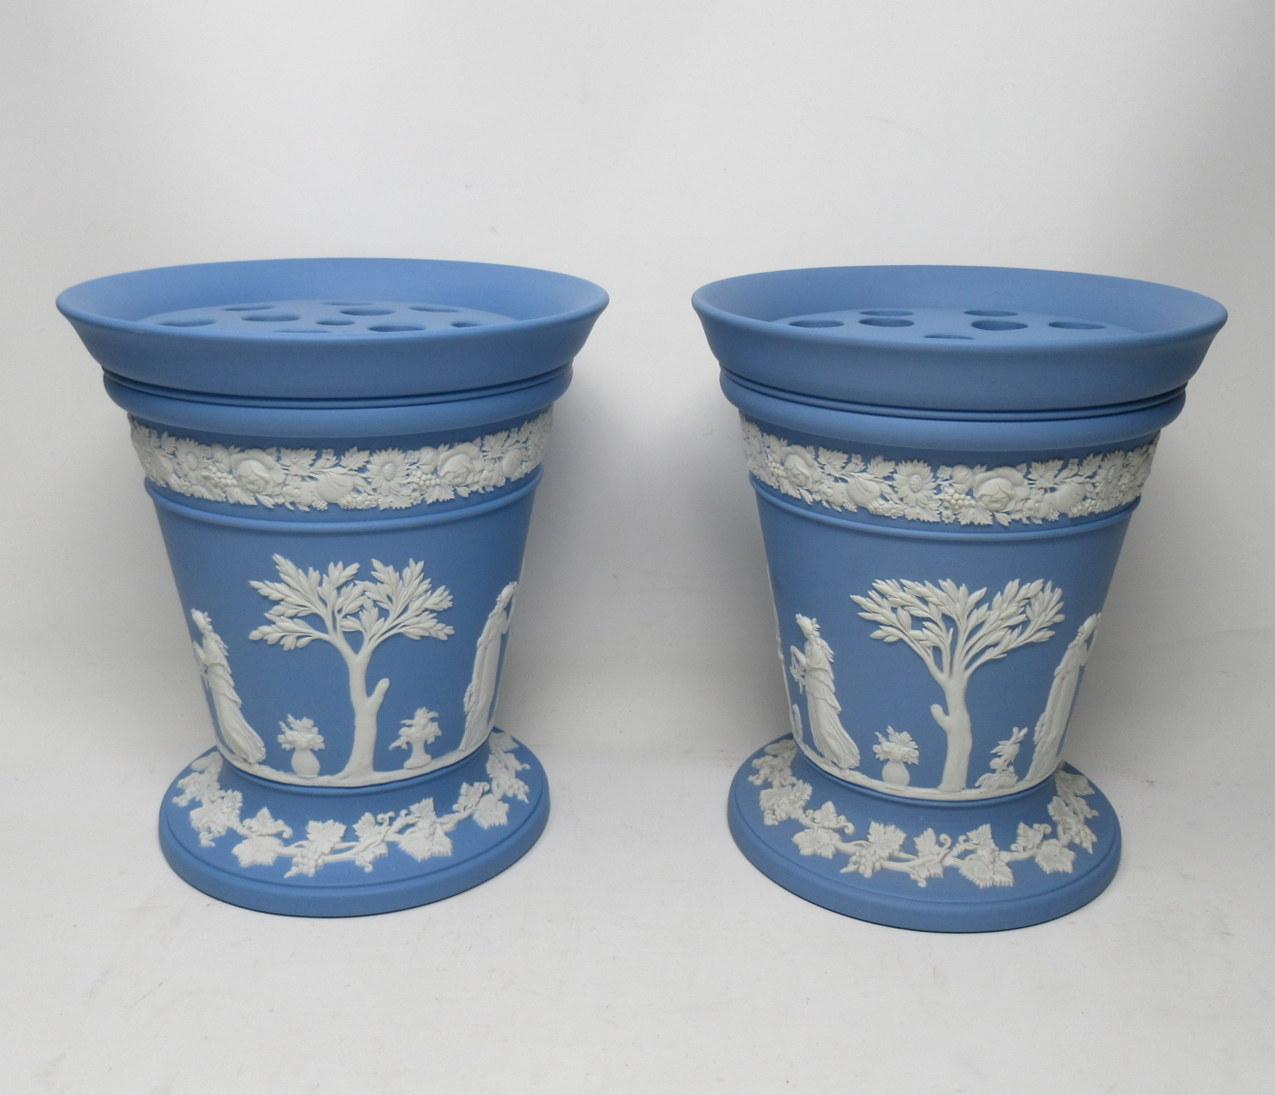 An exceptionally fine example of a pair of English blue jasper ware Wedgwood flower vases of good size proportions and outstanding heavy gauge quality, complete with their original flower receptacles. Midcentury, dated 1960s.

Of trumpet form